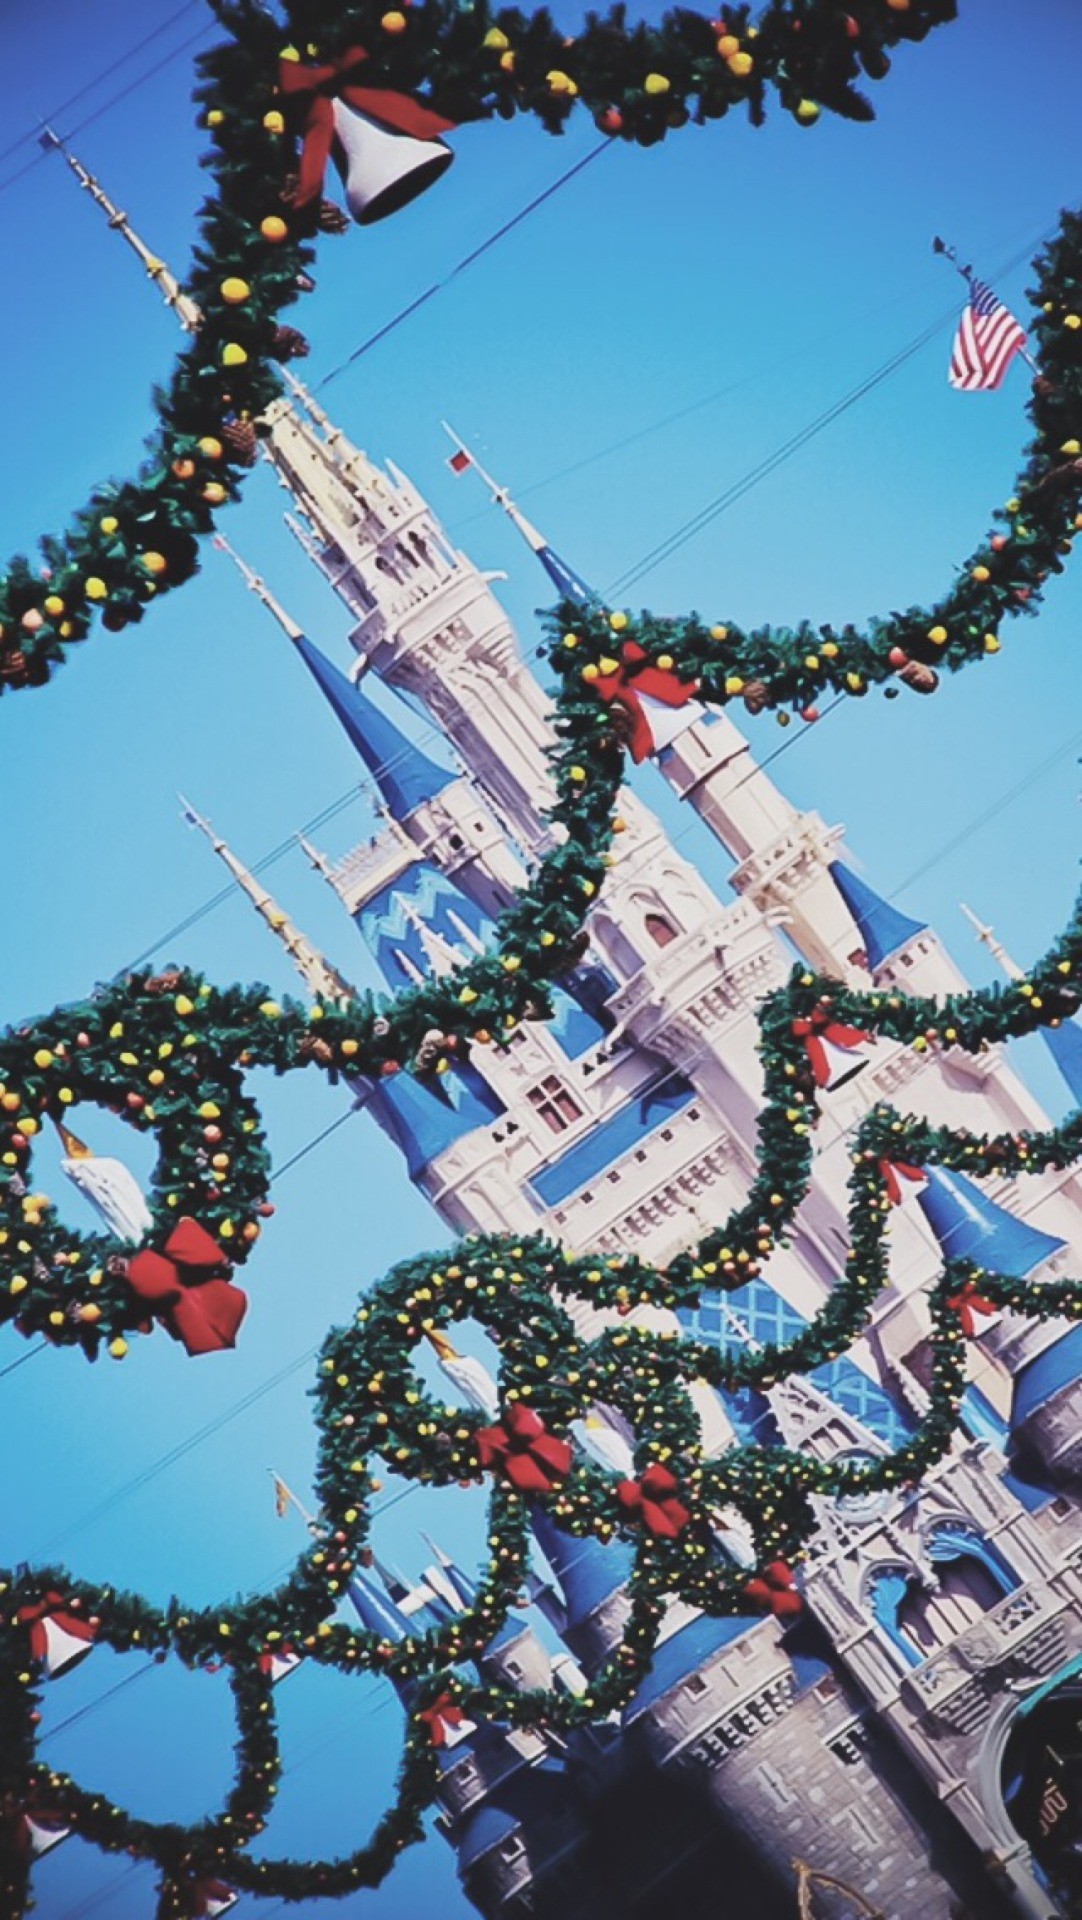 Disney Christmas Wallpaper Backgrounds 58 Pictures